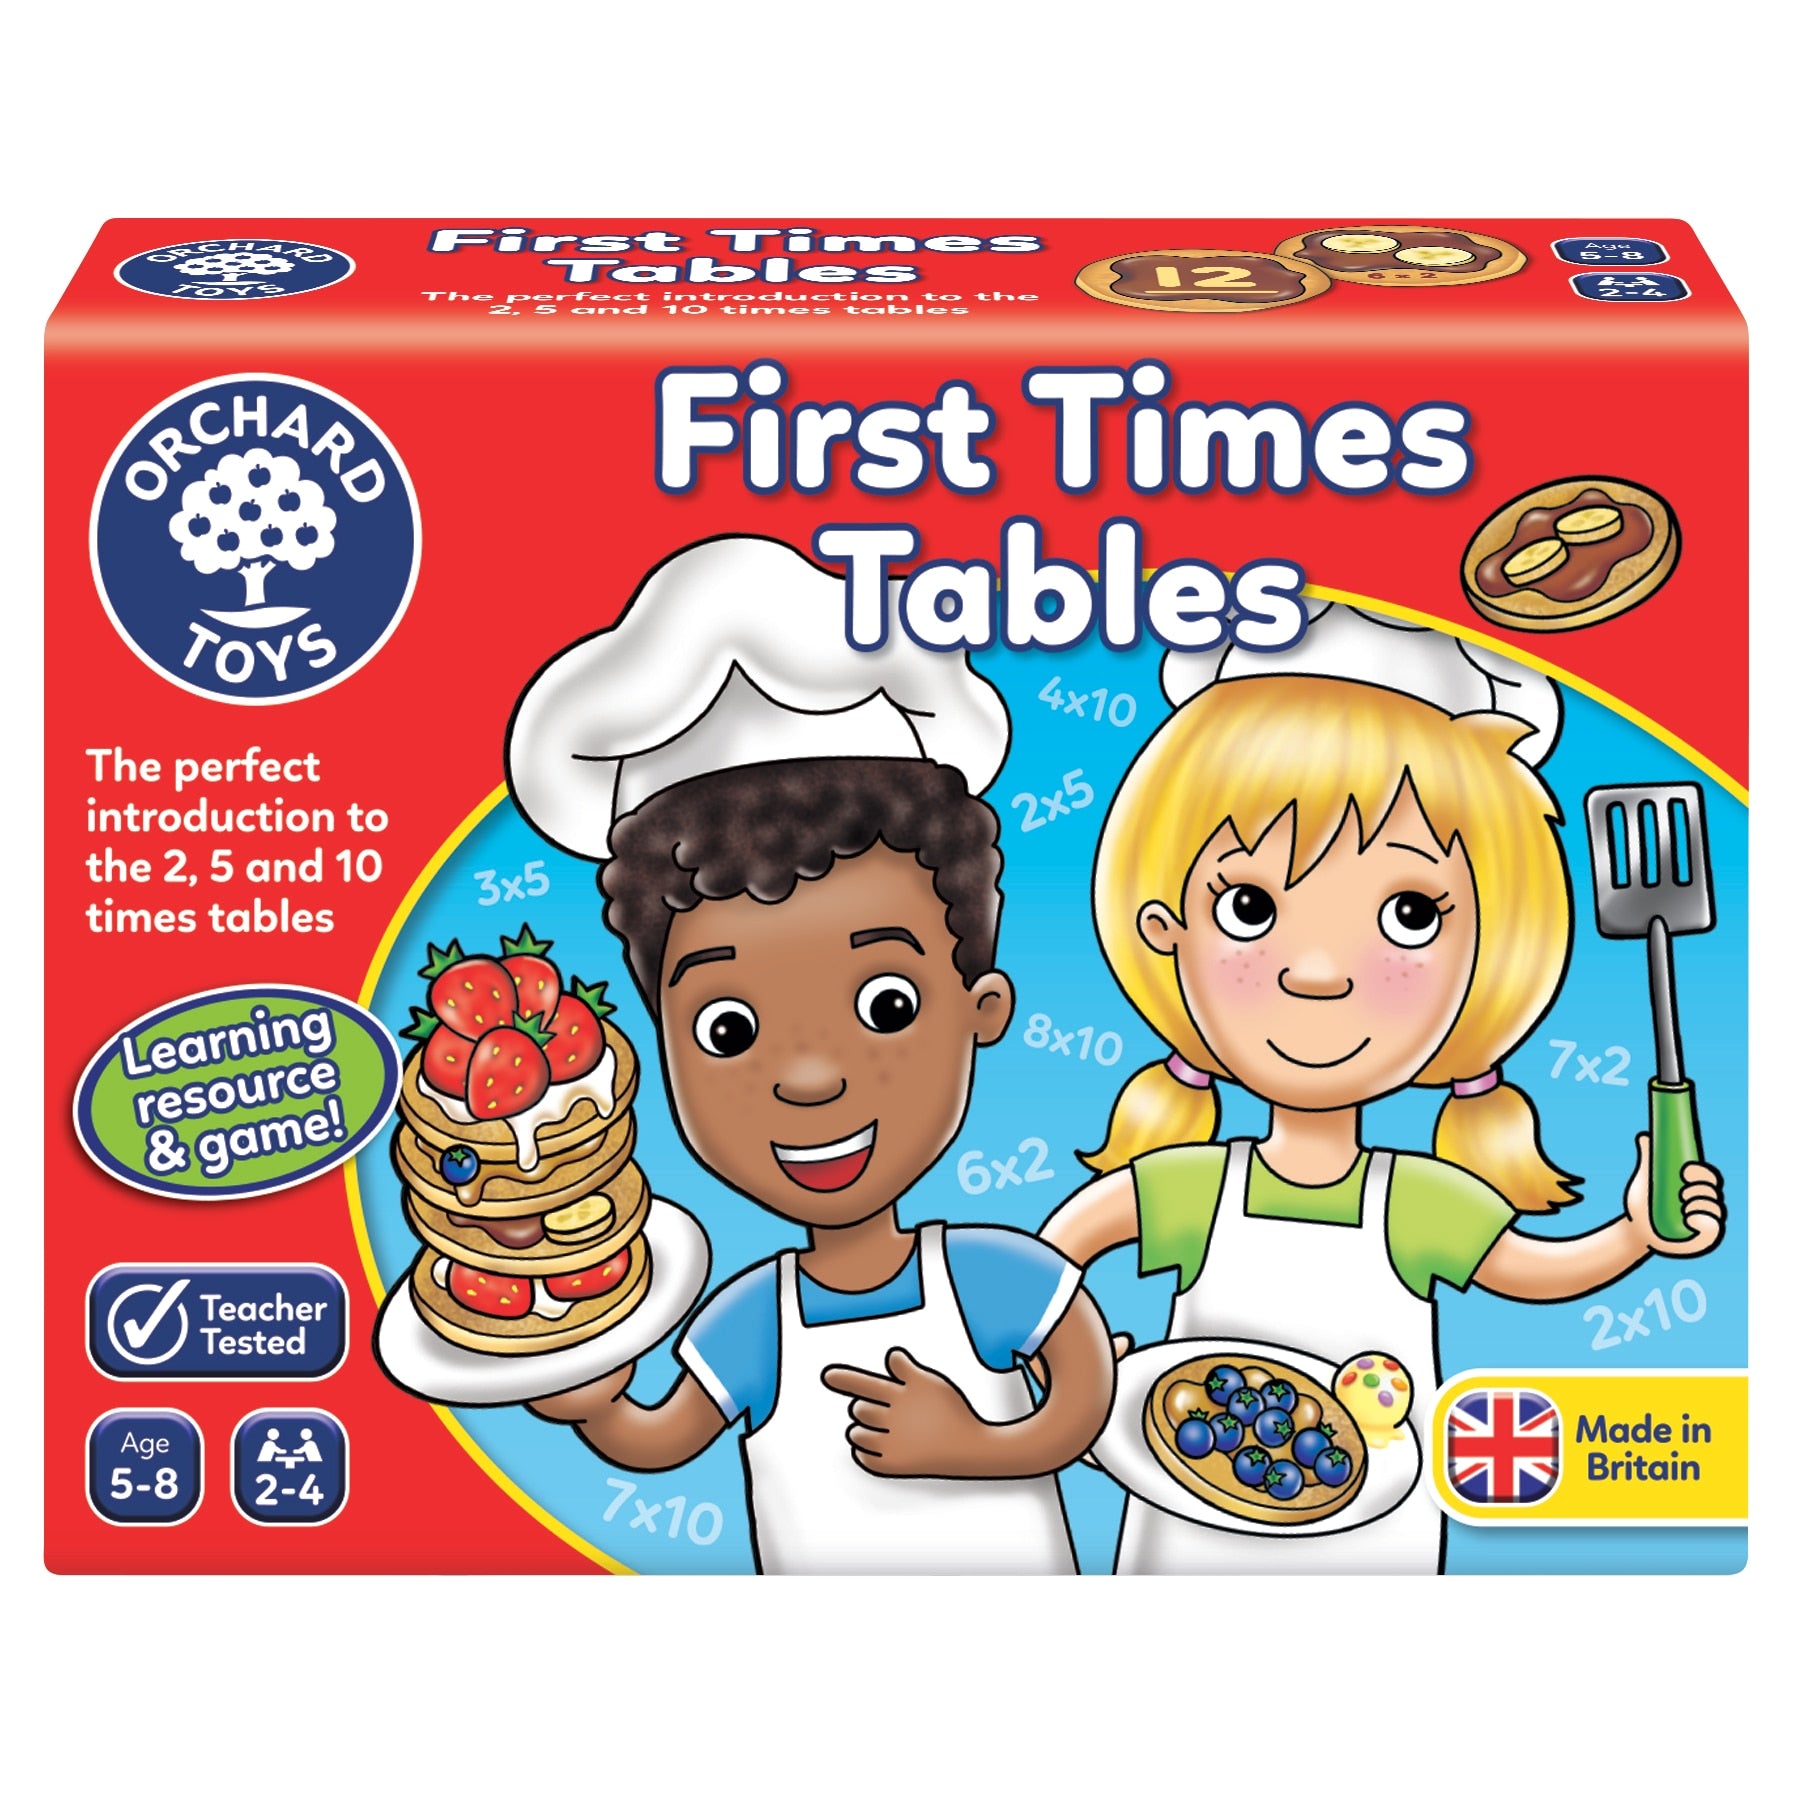 First Times Tables - Orchard